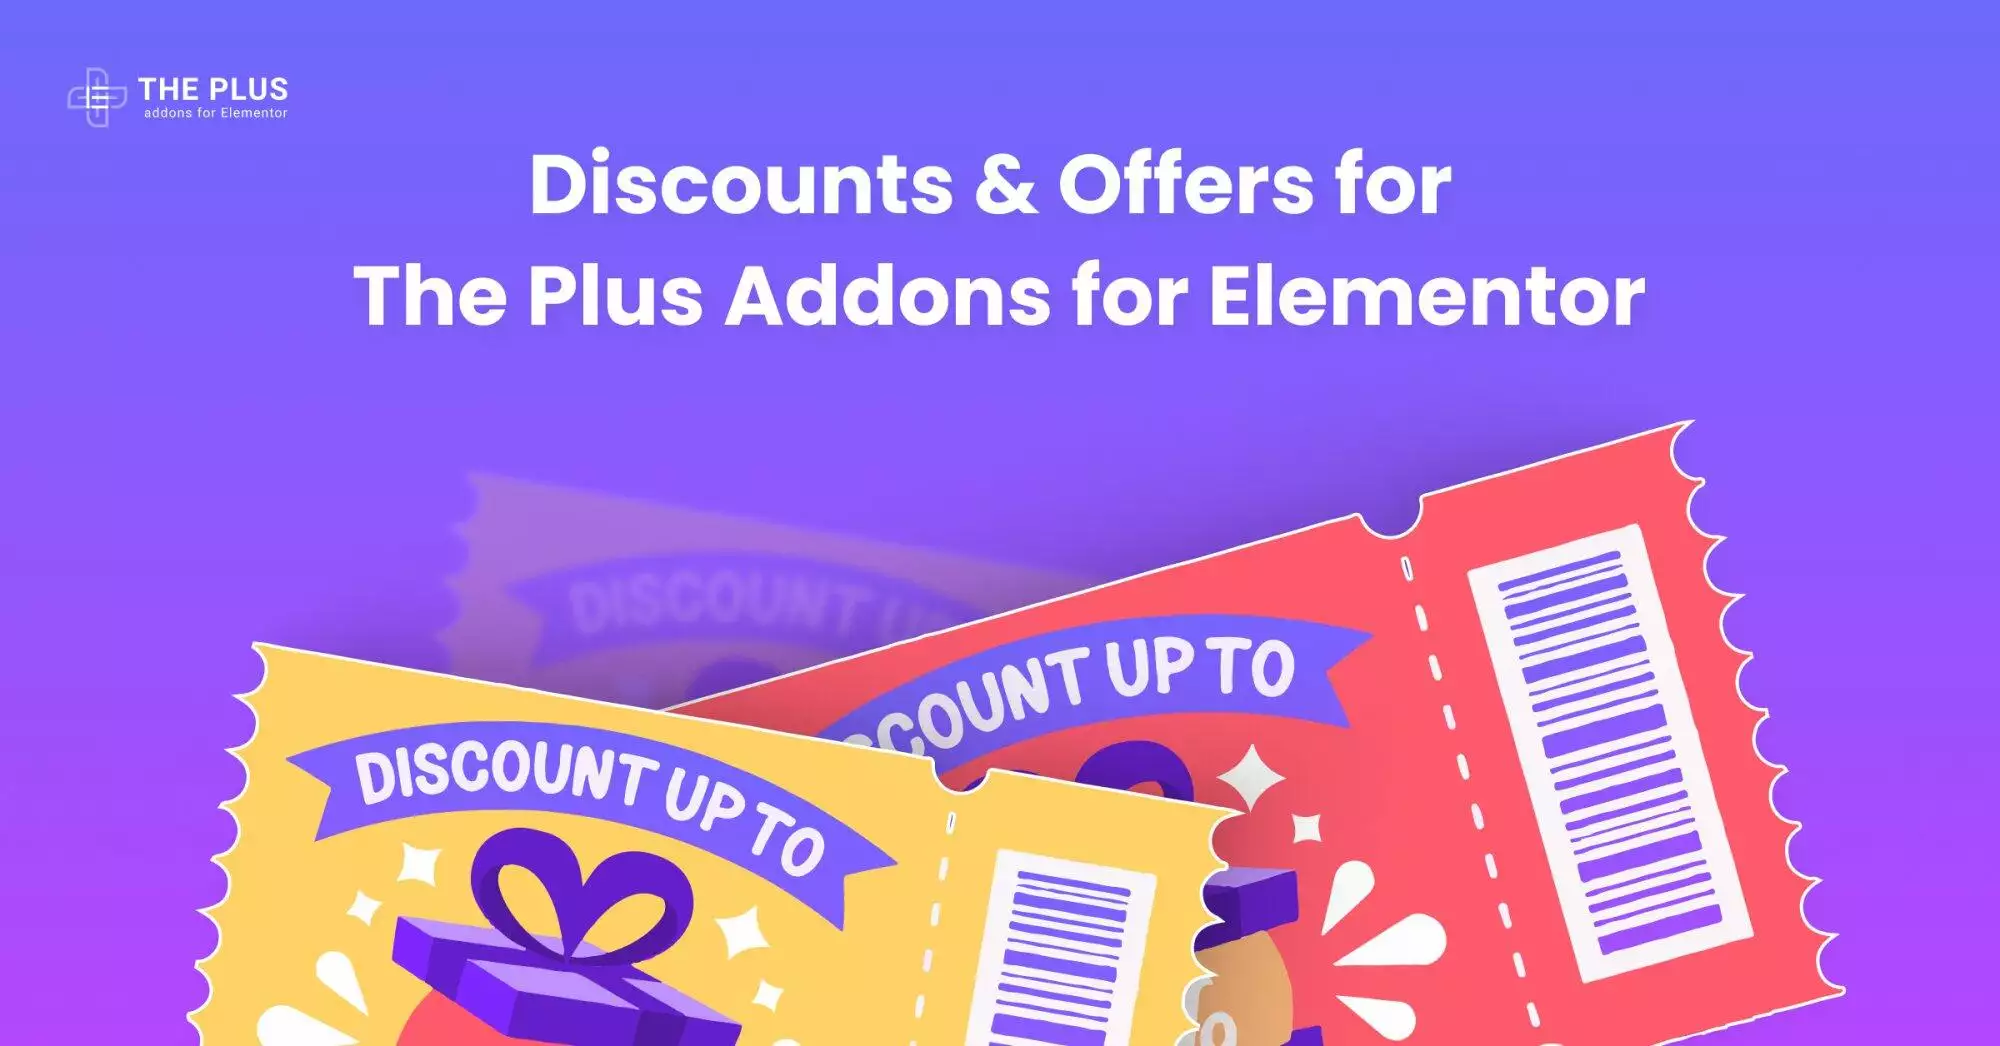 Discounts offers for the plus addons for elementor the plus addons for elementor (upto 50% off) - discounts code & offers from the plus addons for elementor